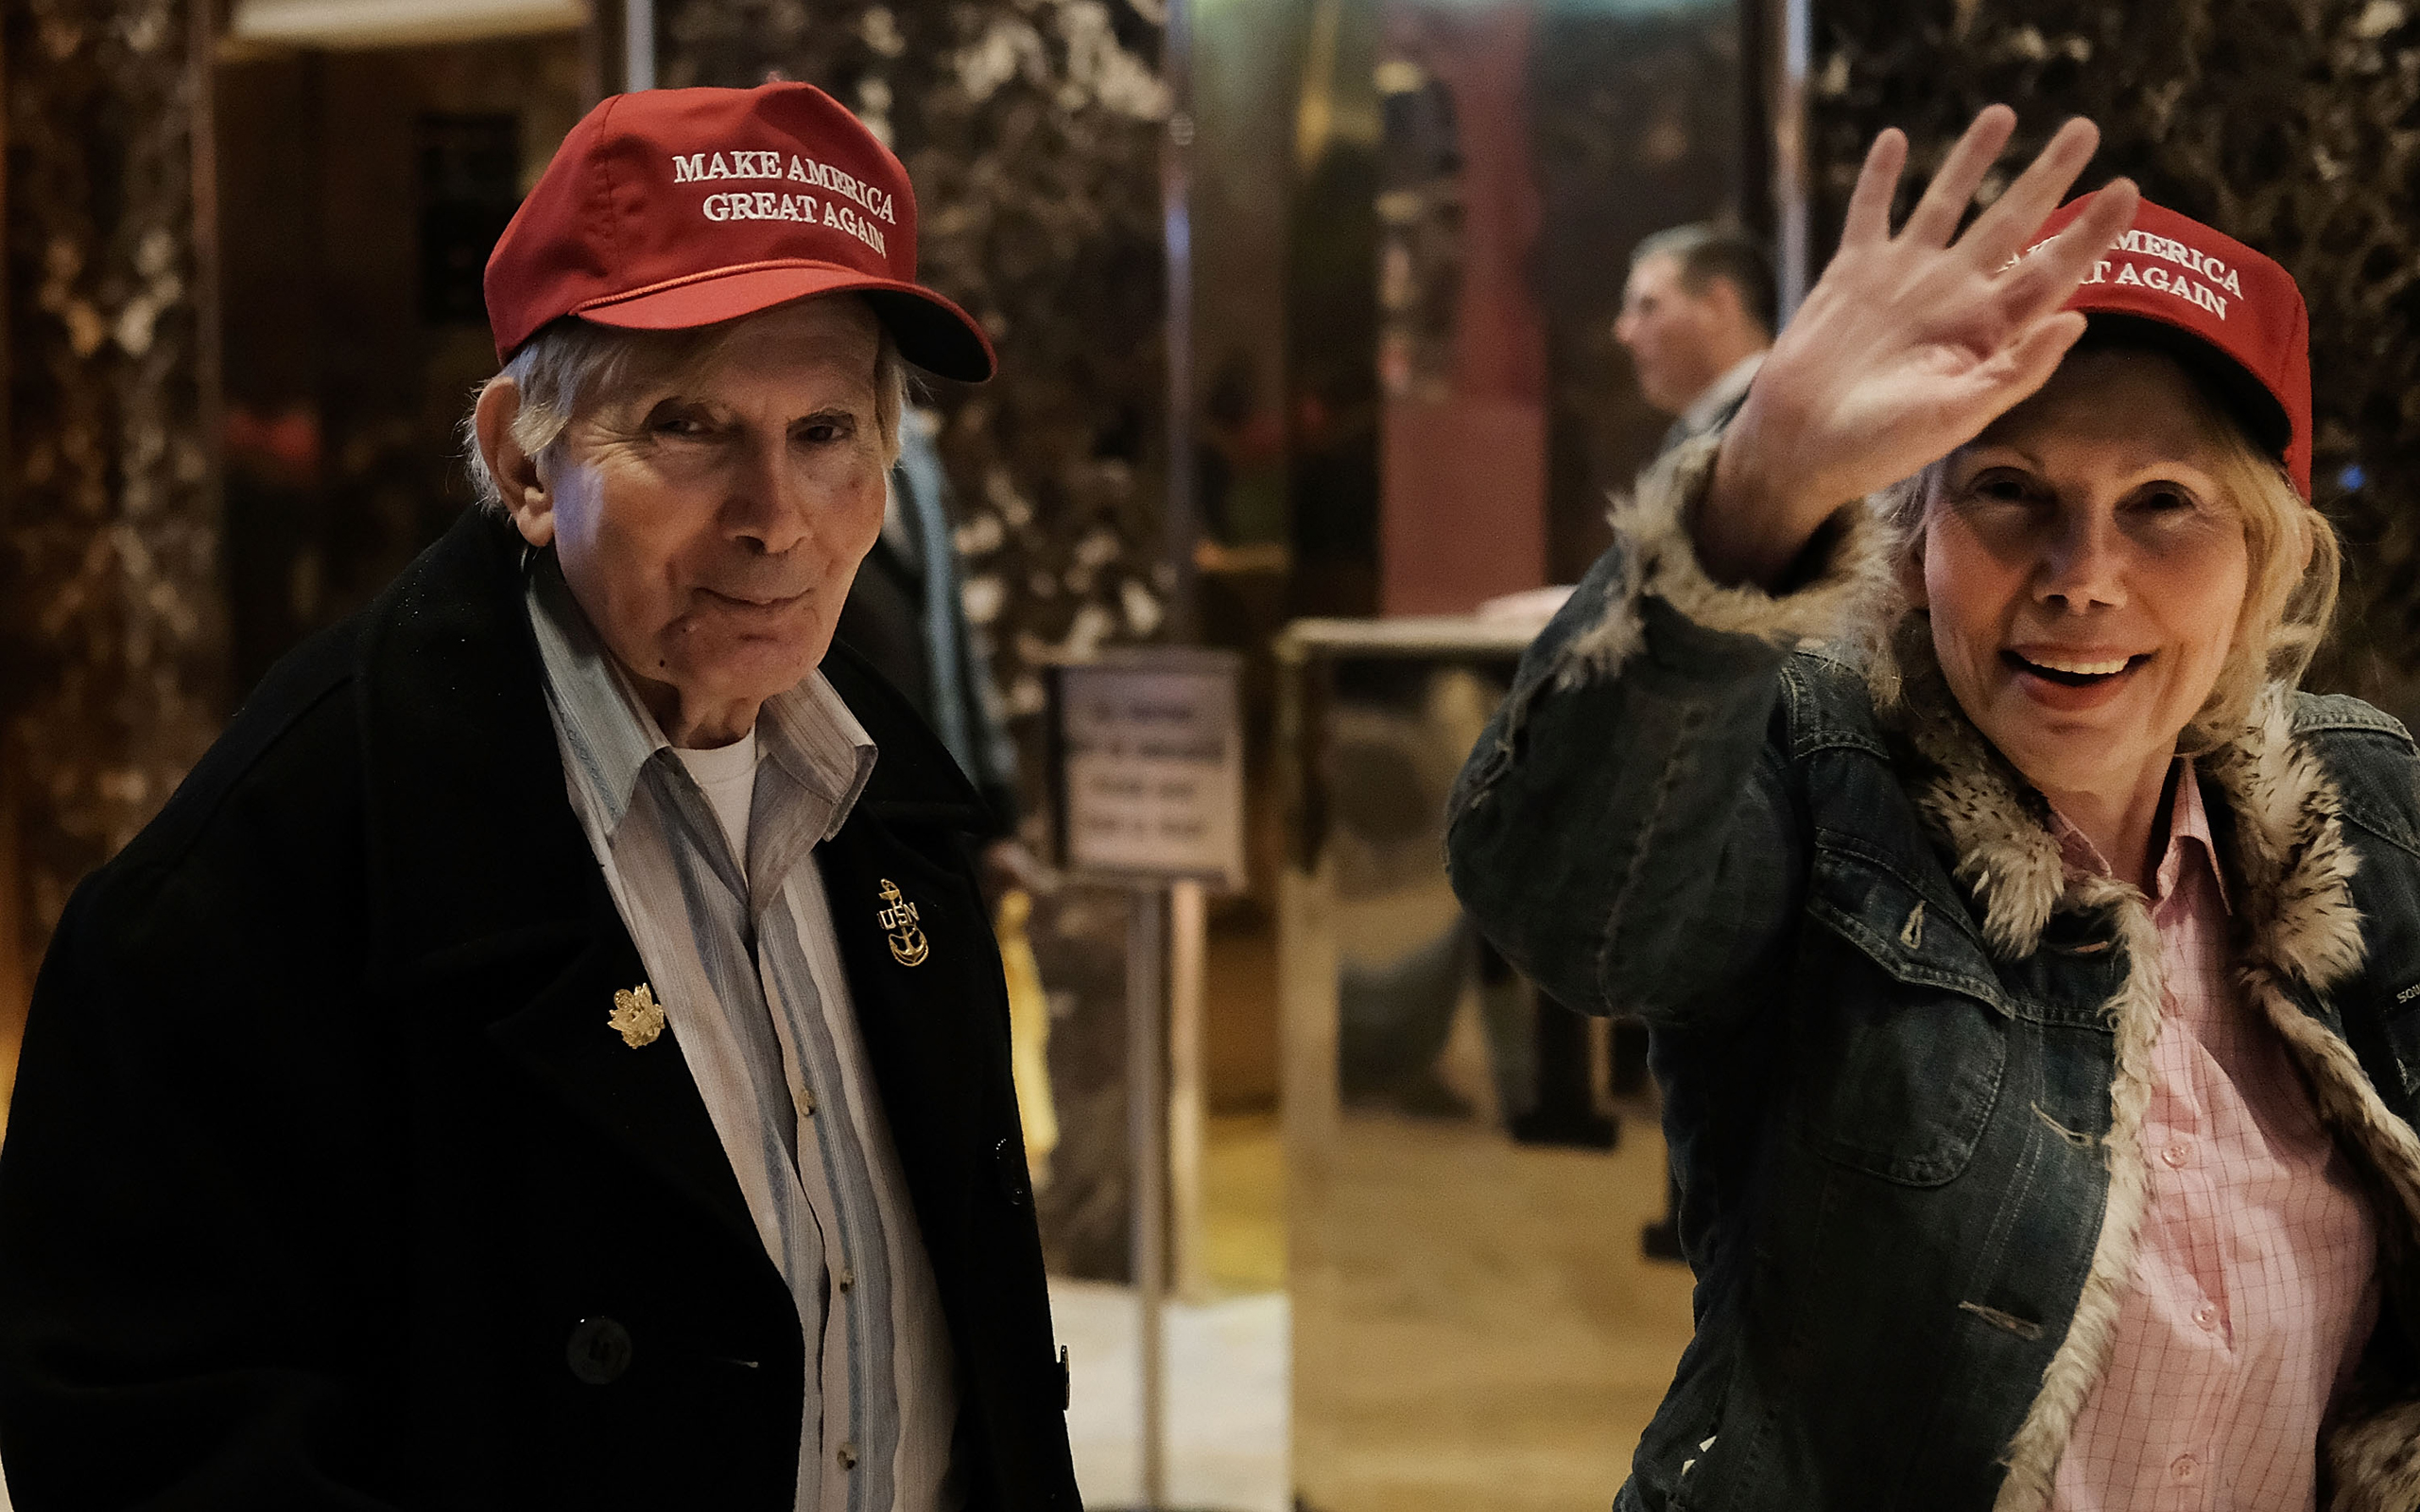 Donald Trump supporters walk through the lobby of Trump Tower as the media congregates in the lobby on Nov. 18, 2016.